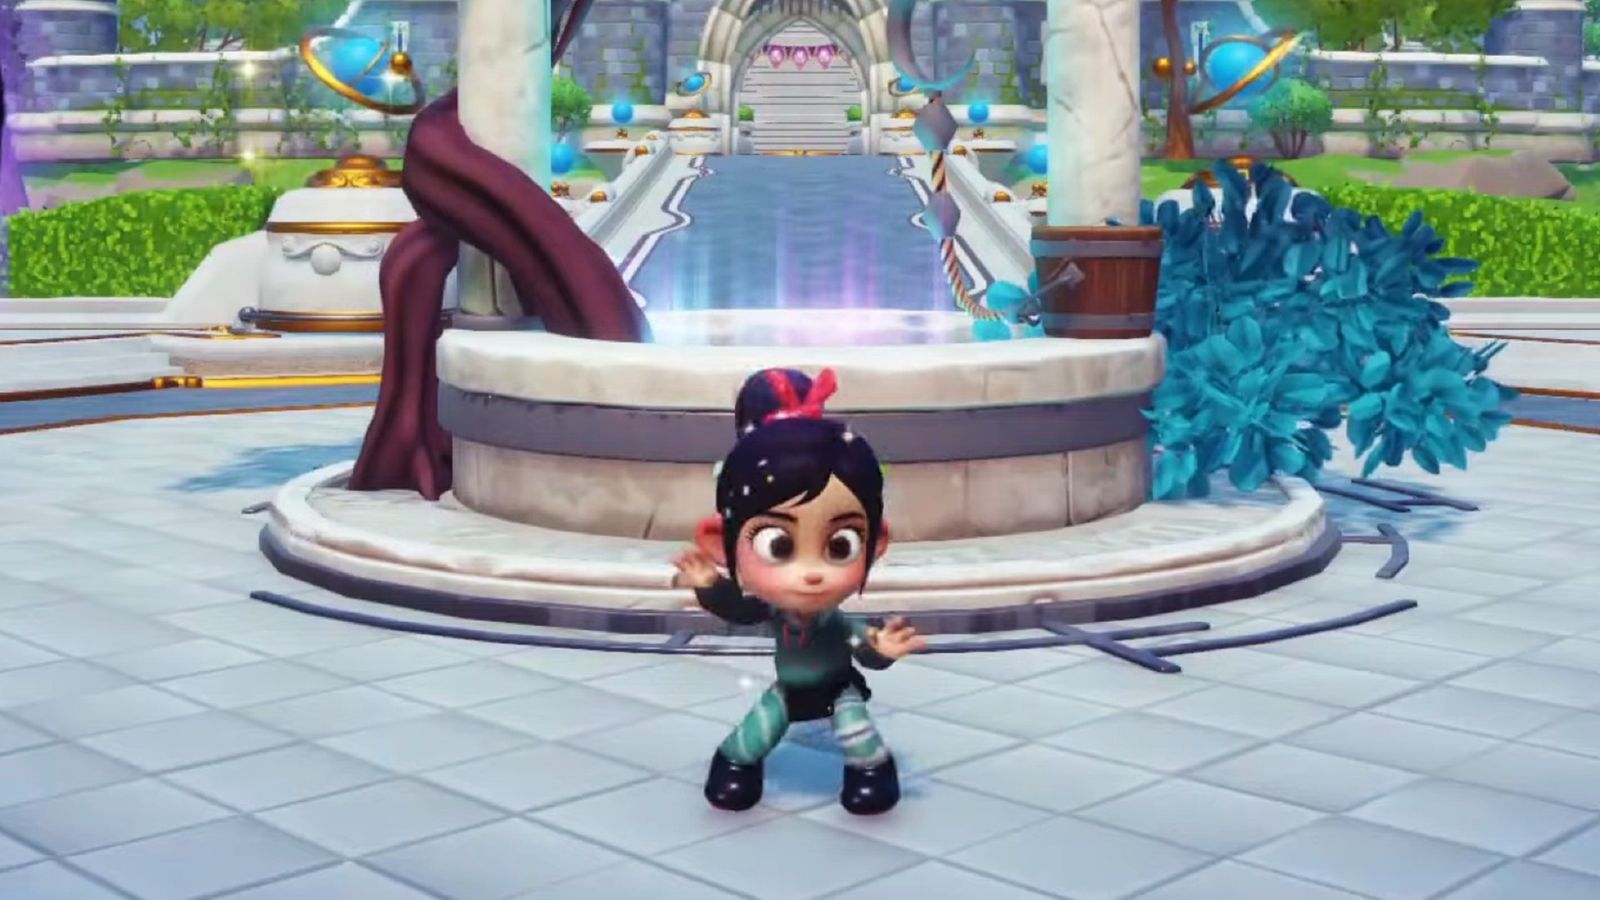 Disney Dreamlight Valley - Vanellope dancing in front of a fountain